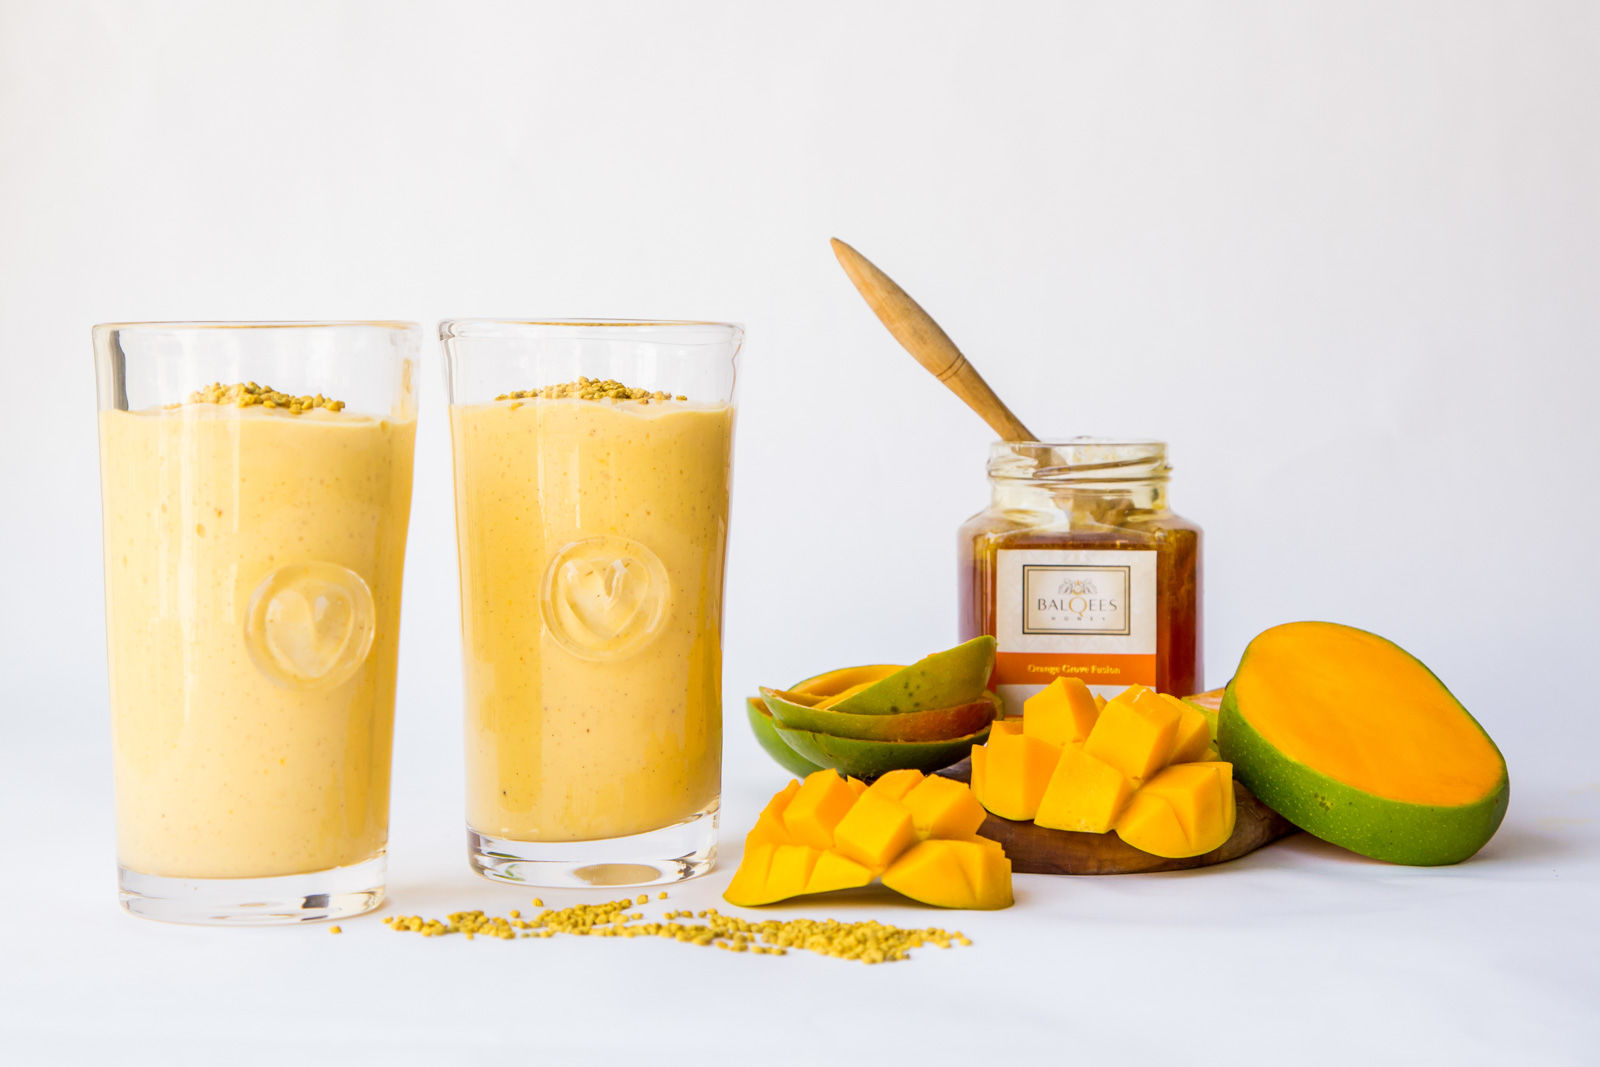 Two glasses of mango smoothie, a jar of honey and some mangoes